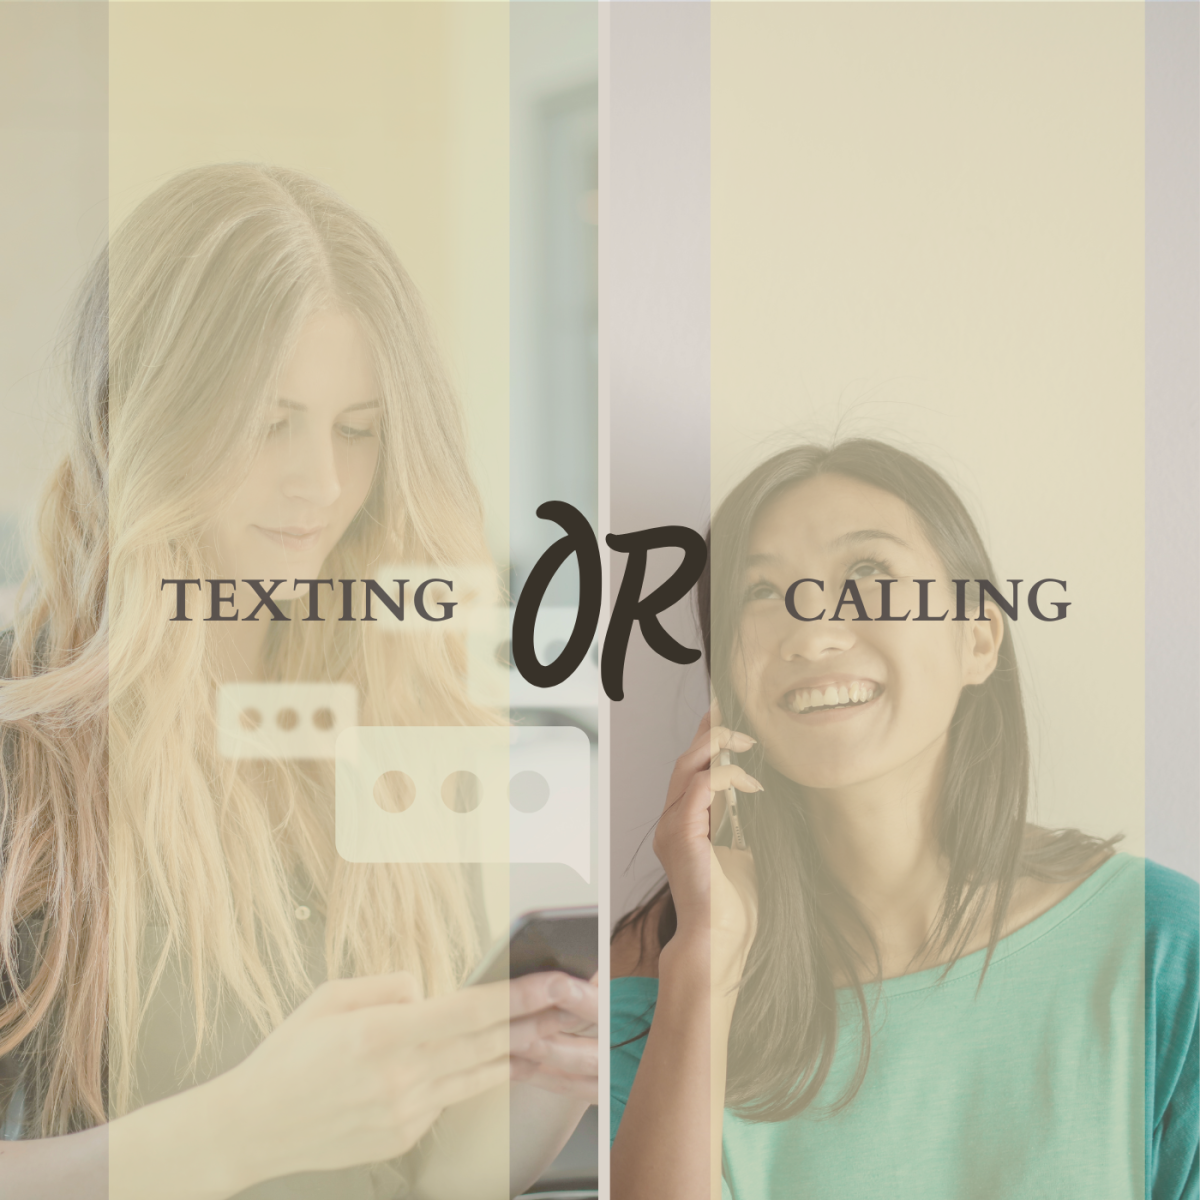 Texting or calling?